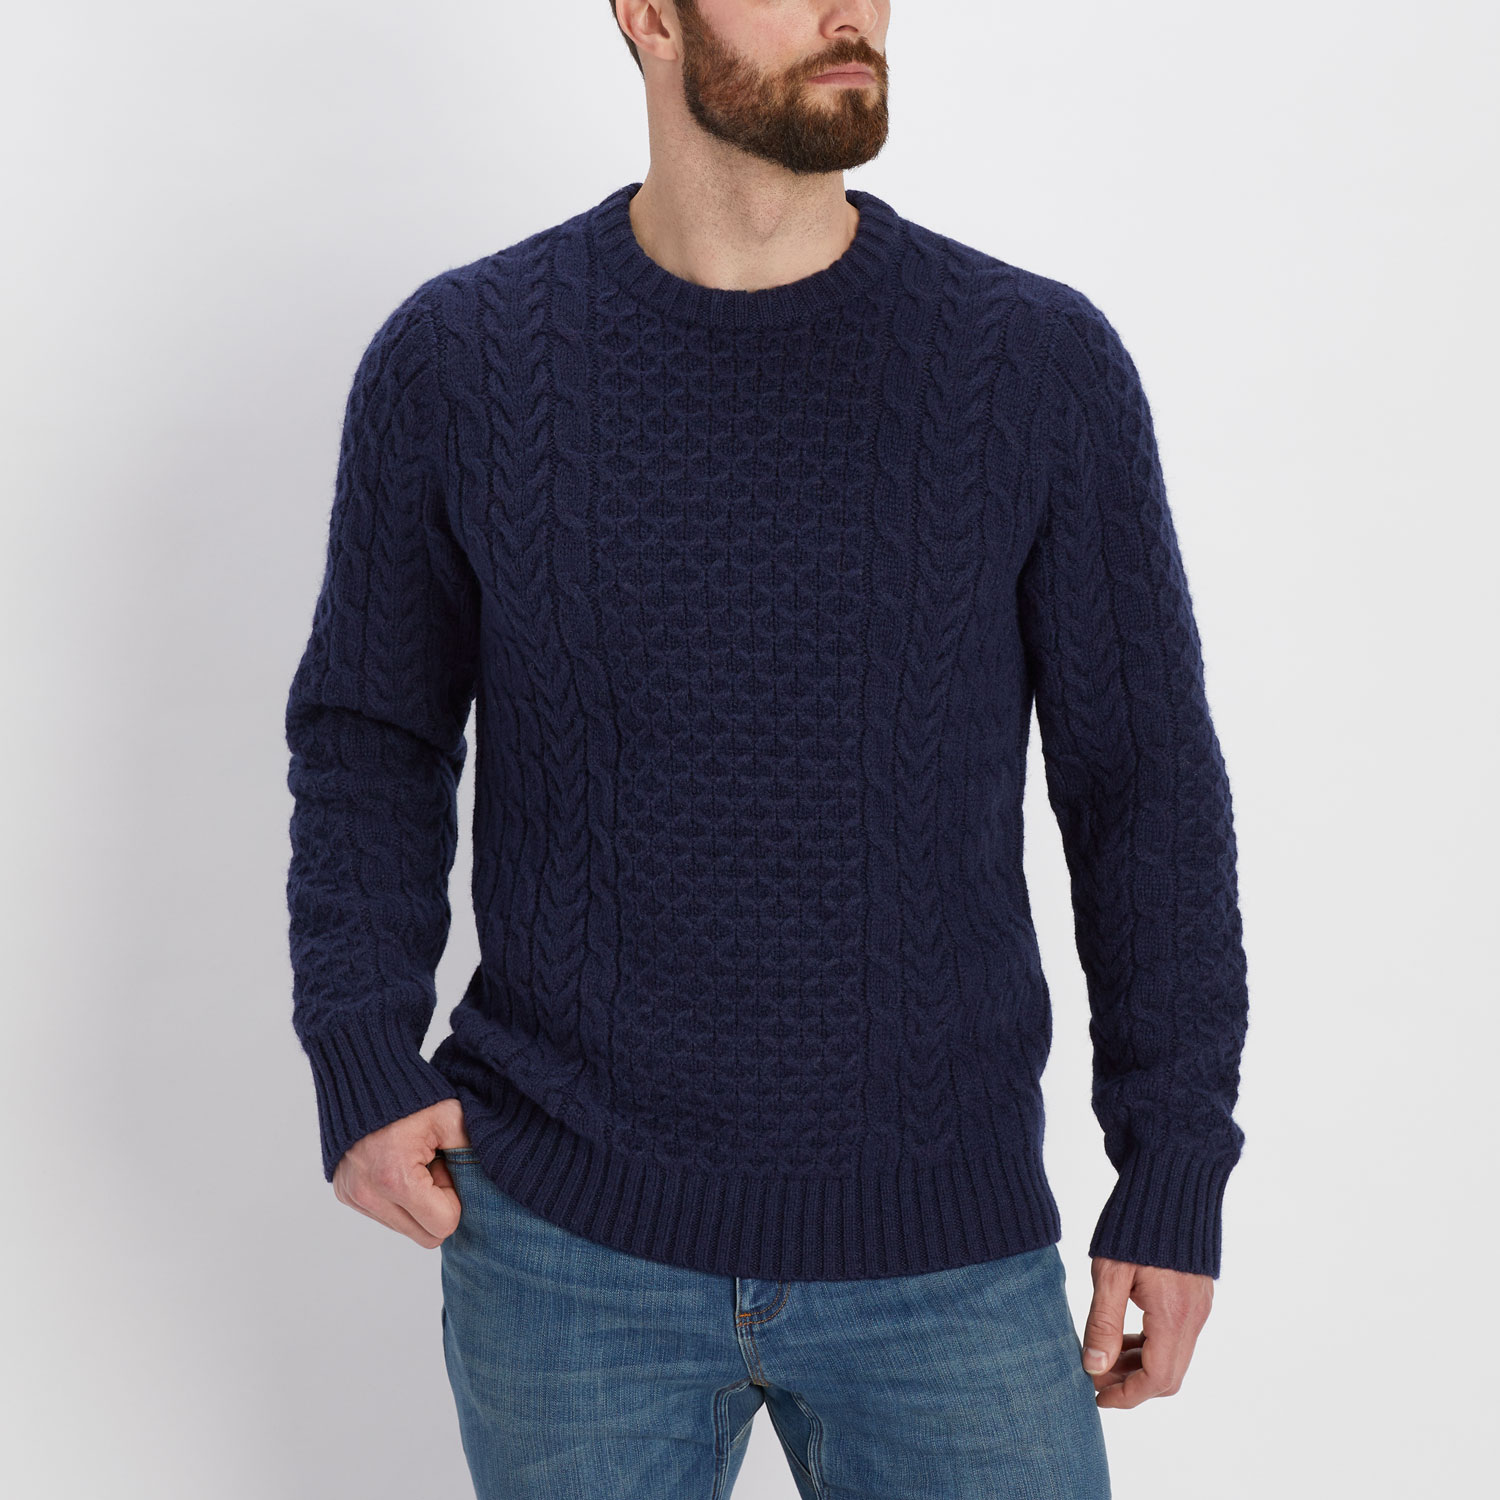 Men's Shetland Wool Cable Sweater | Duluth Trading Company